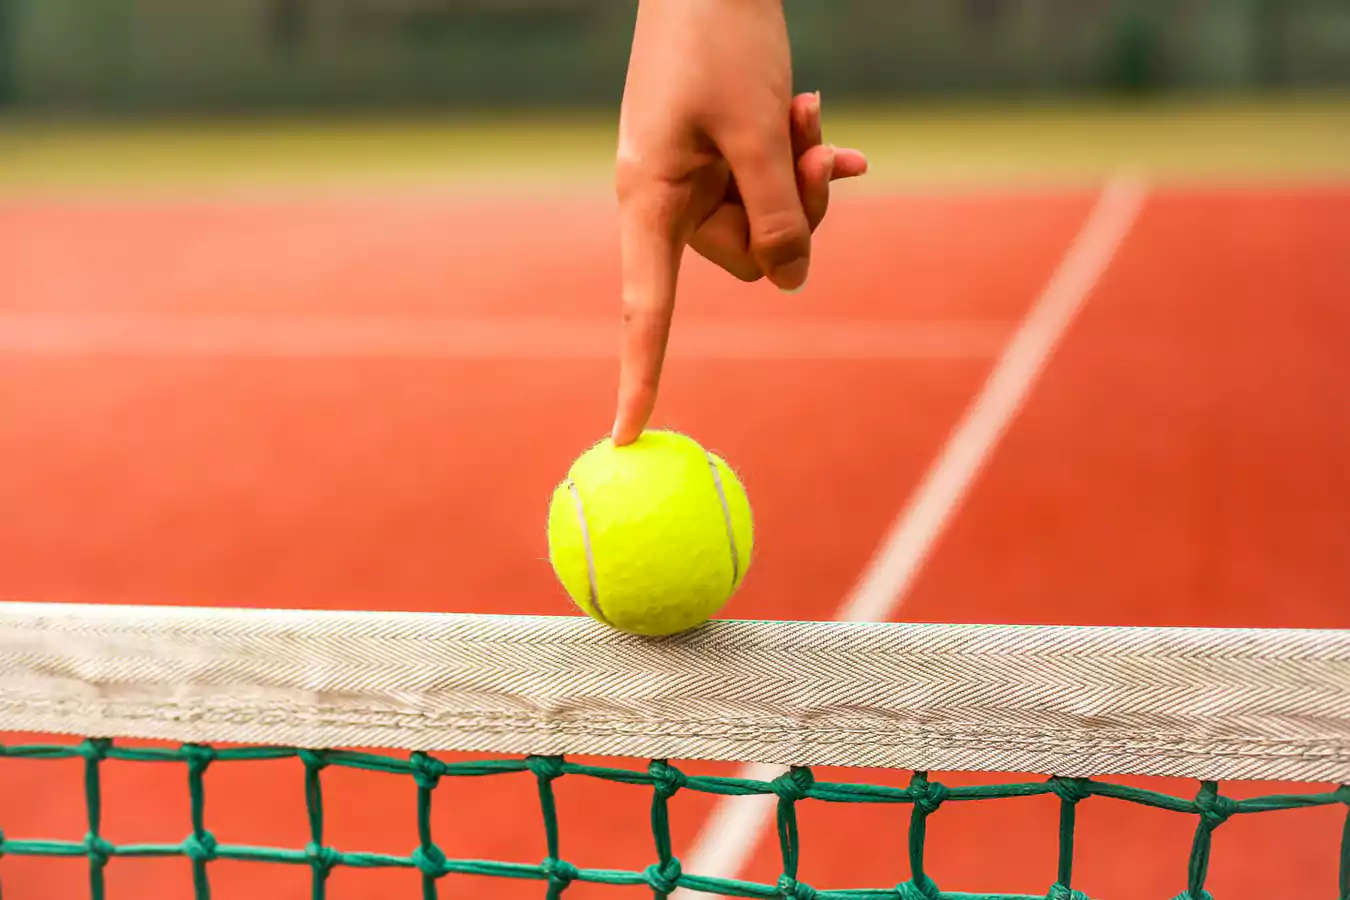 Red clay court with lady pointing at a tennis ball over the net